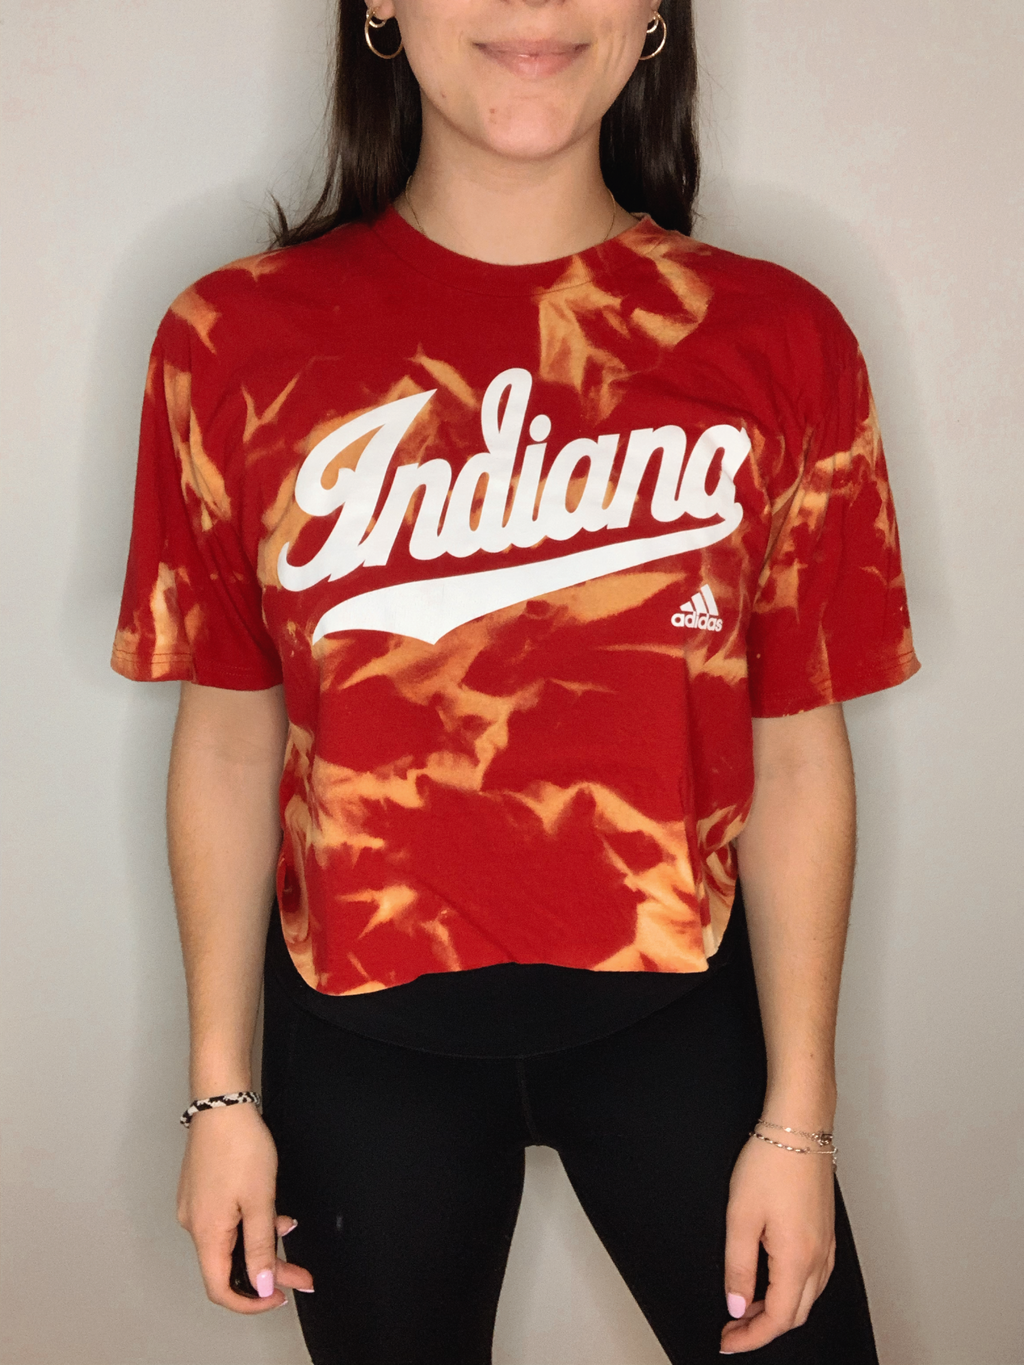 Indiana University Bleached & Cropped Shirt